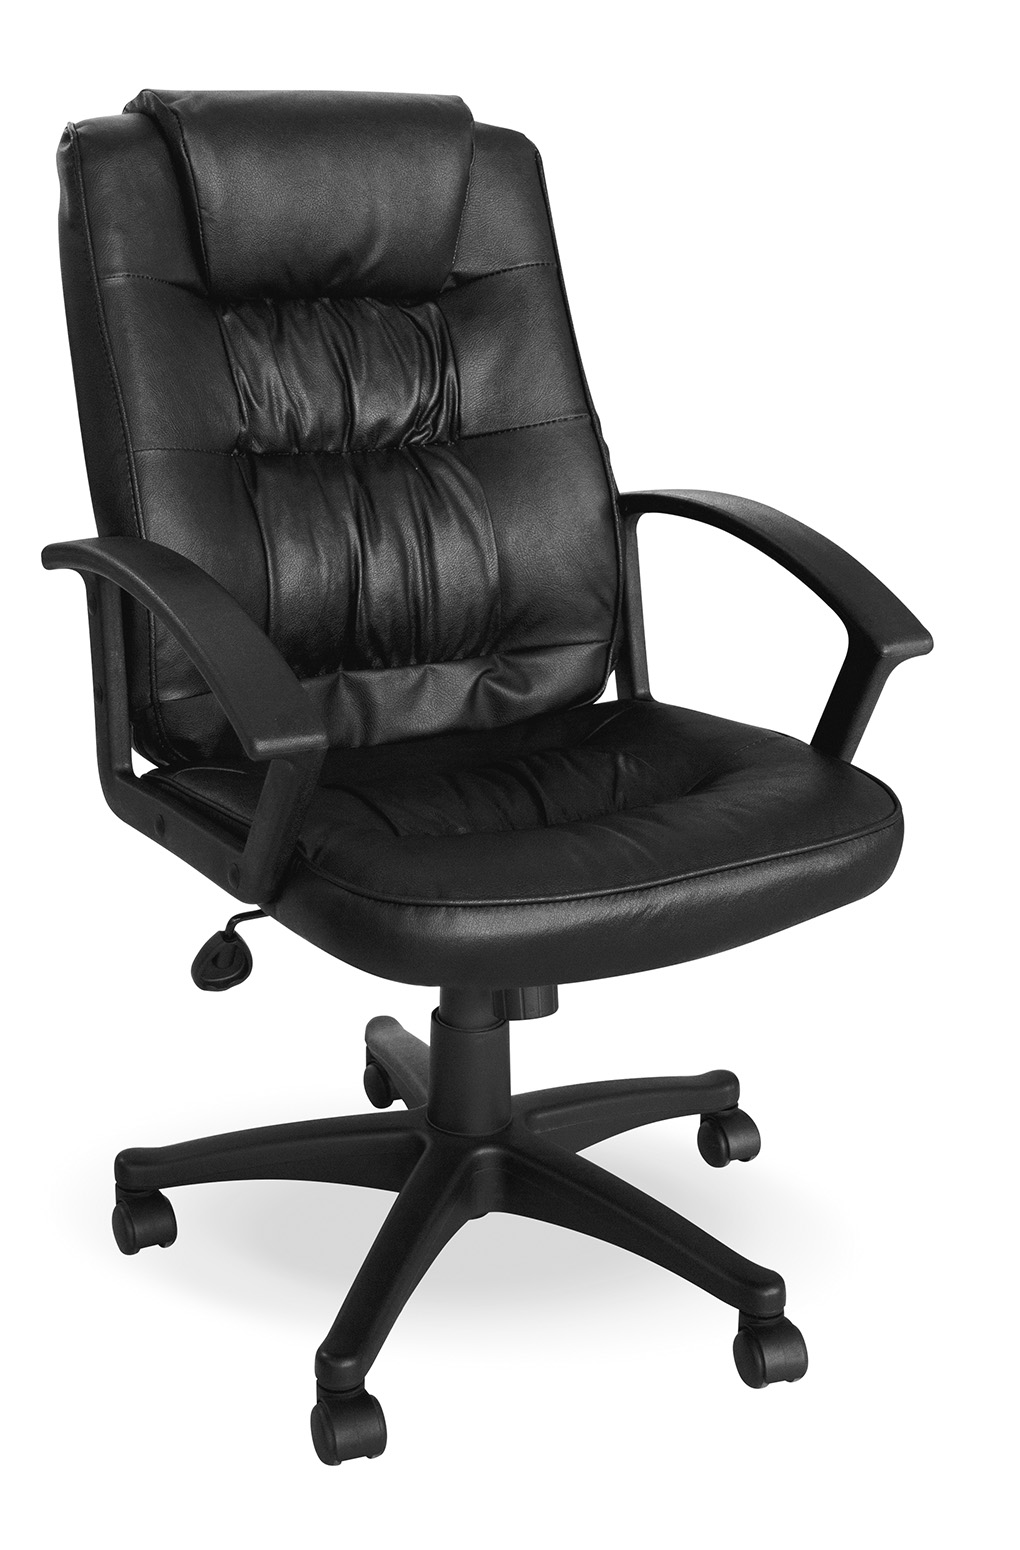 PS1701 Concorde Operators Office Chairs For Sale 1 